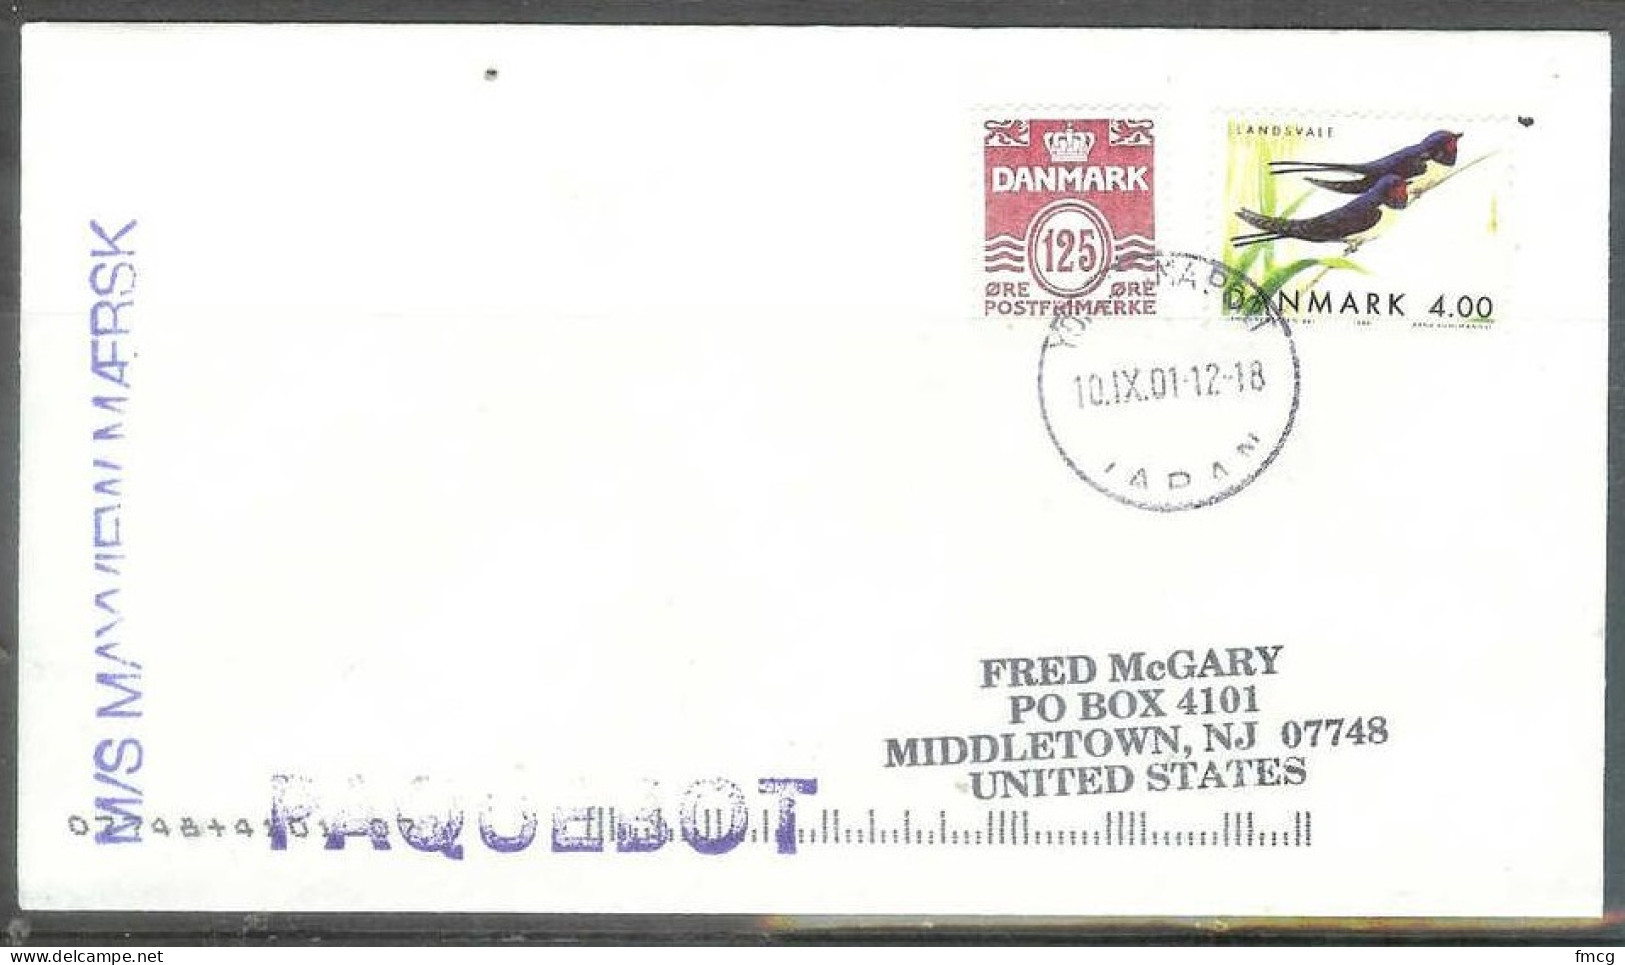 1993 Paquebot Cover, Denmark Butterfly Stamp Used At Yokohama, Japan - Covers & Documents